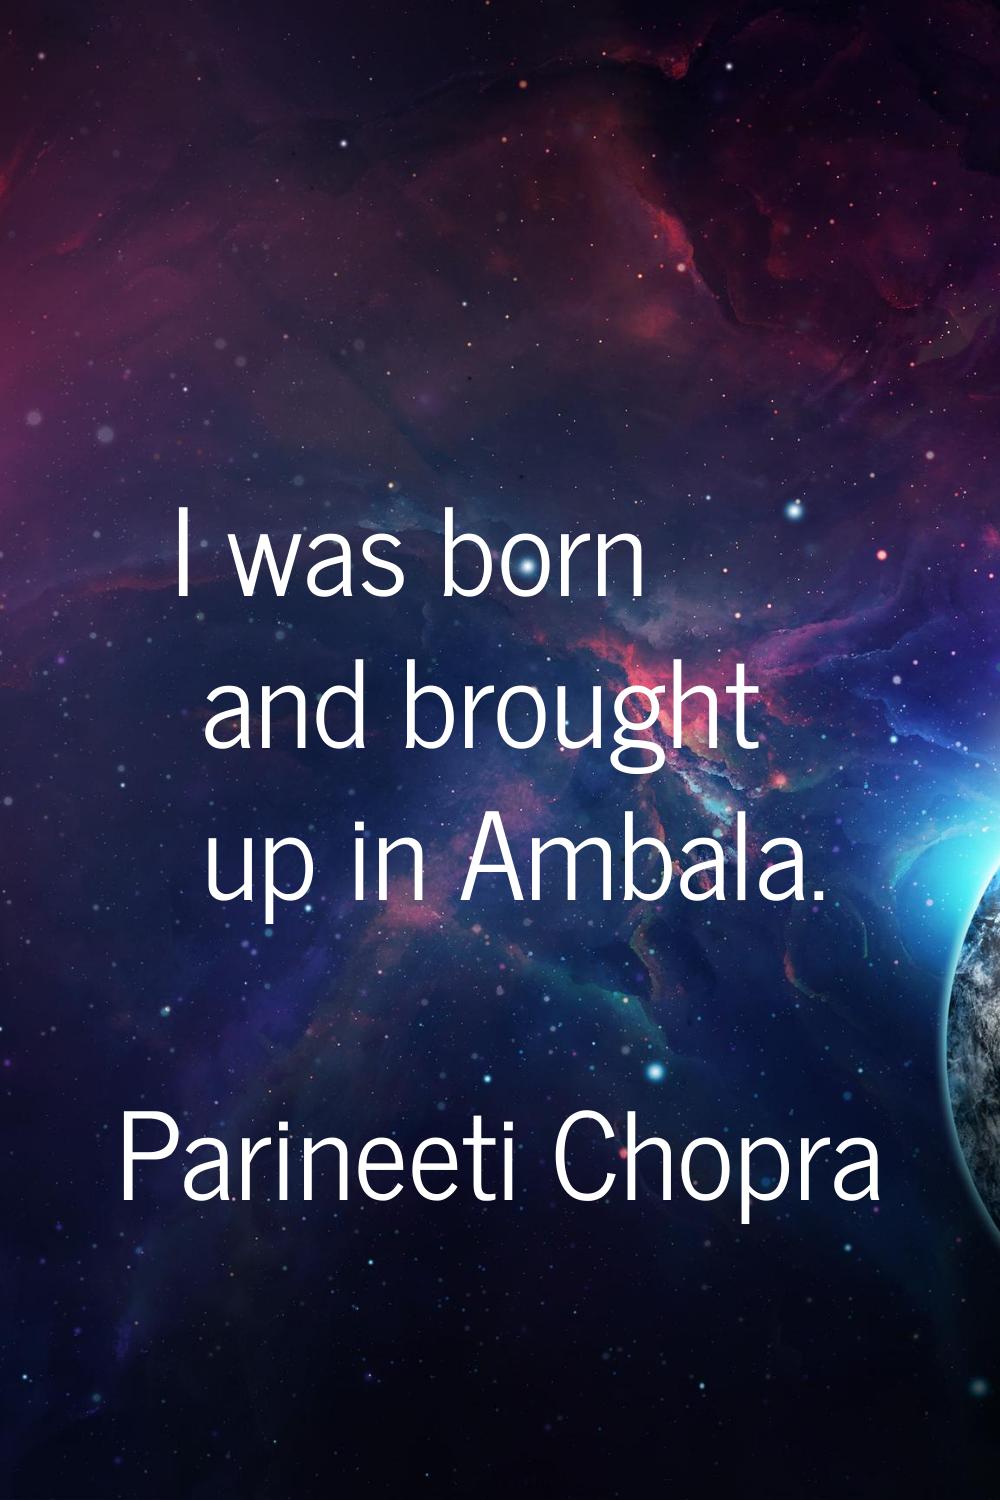 I was born and brought up in Ambala.